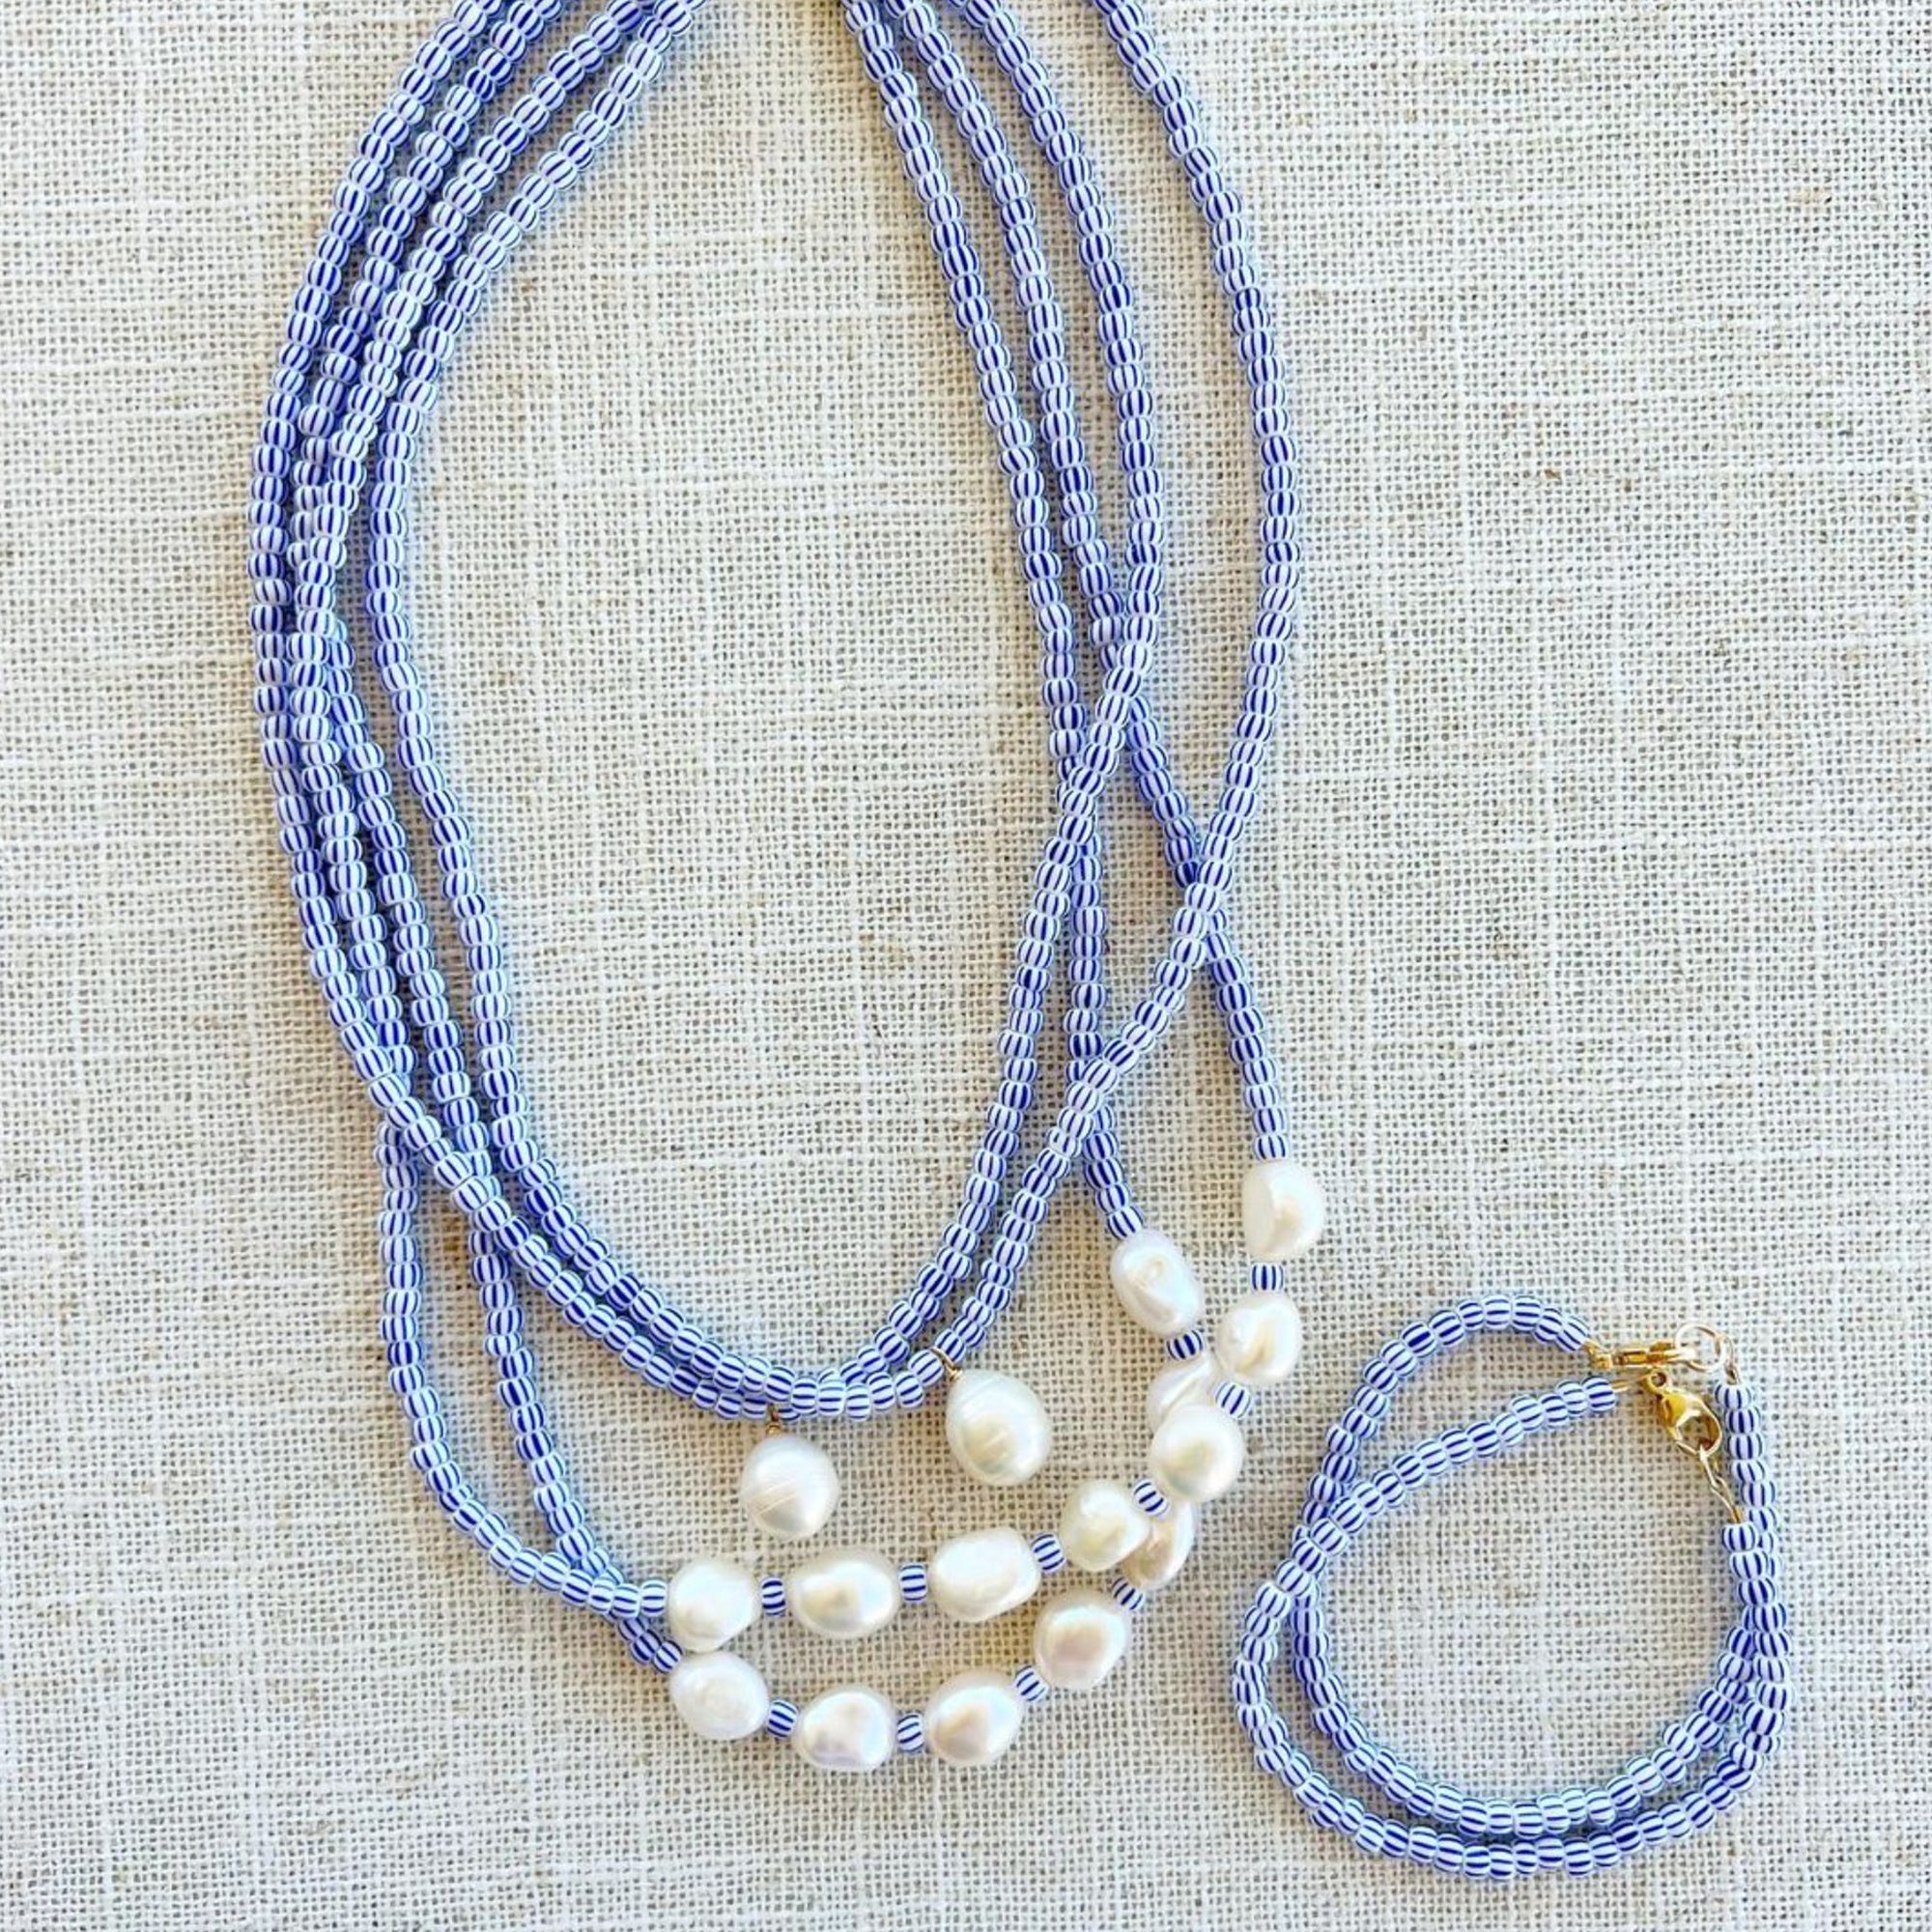 Blue And White Beads With Porcelain Pendant